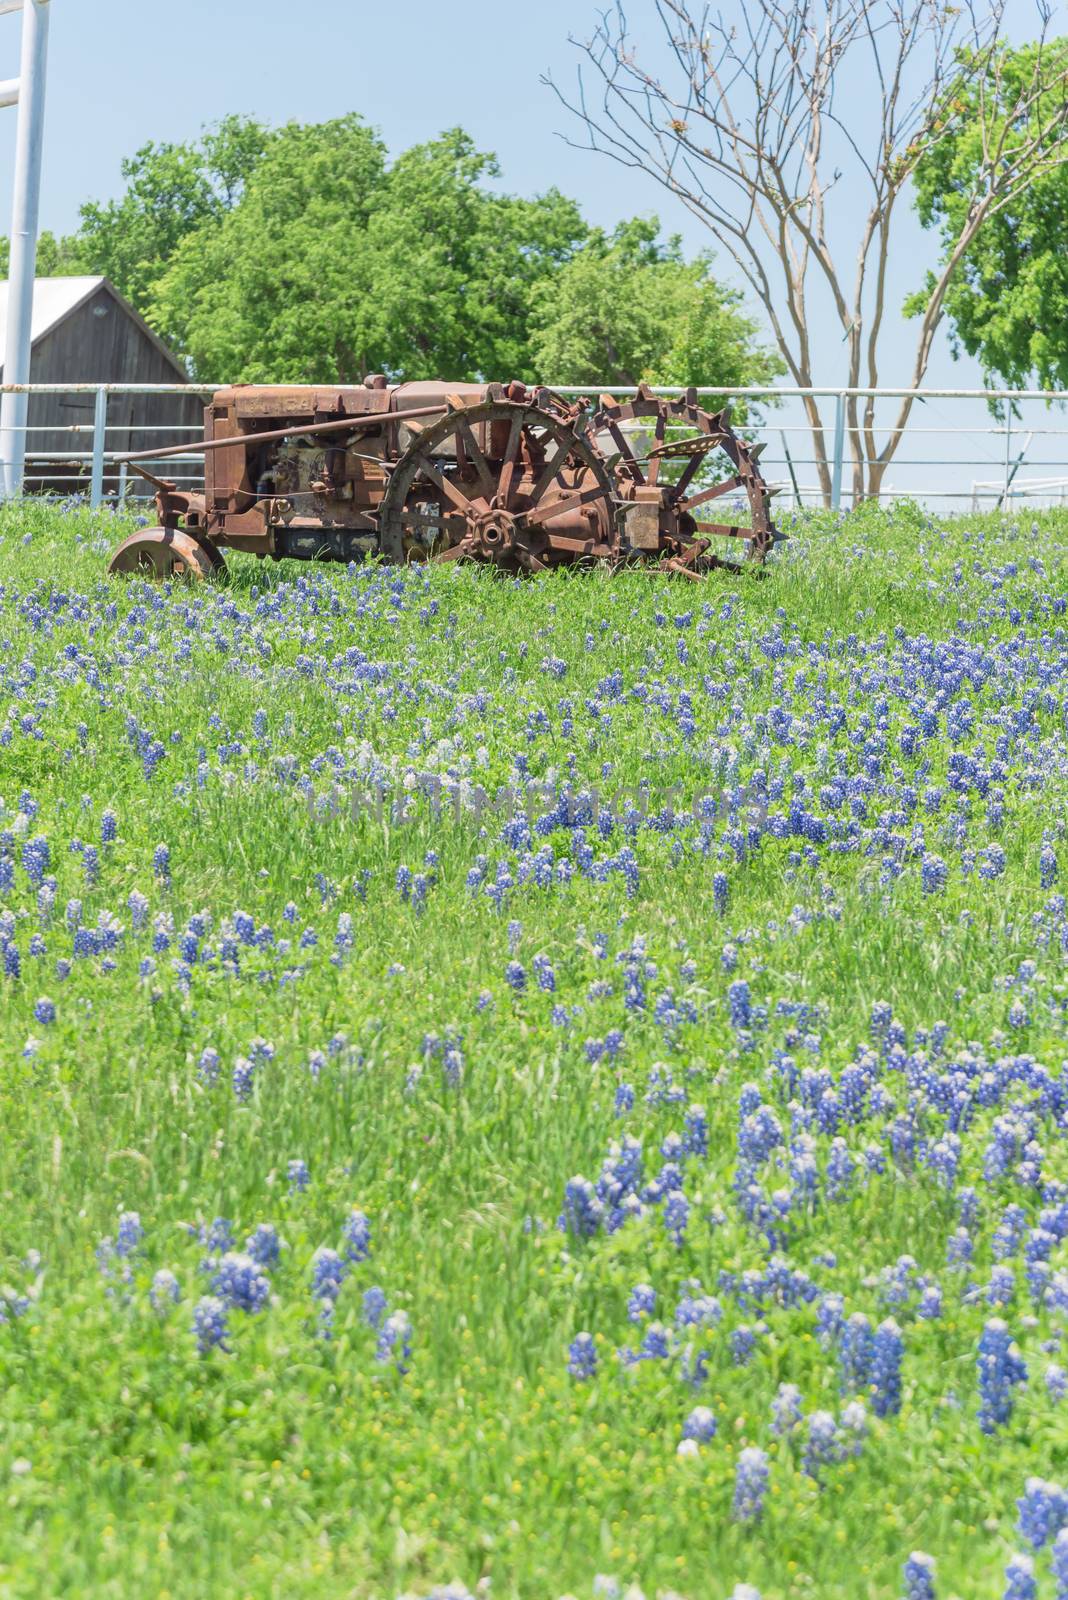 Rural scene in Texas with old tractor and Bluebonnet blossom in springtime by trongnguyen